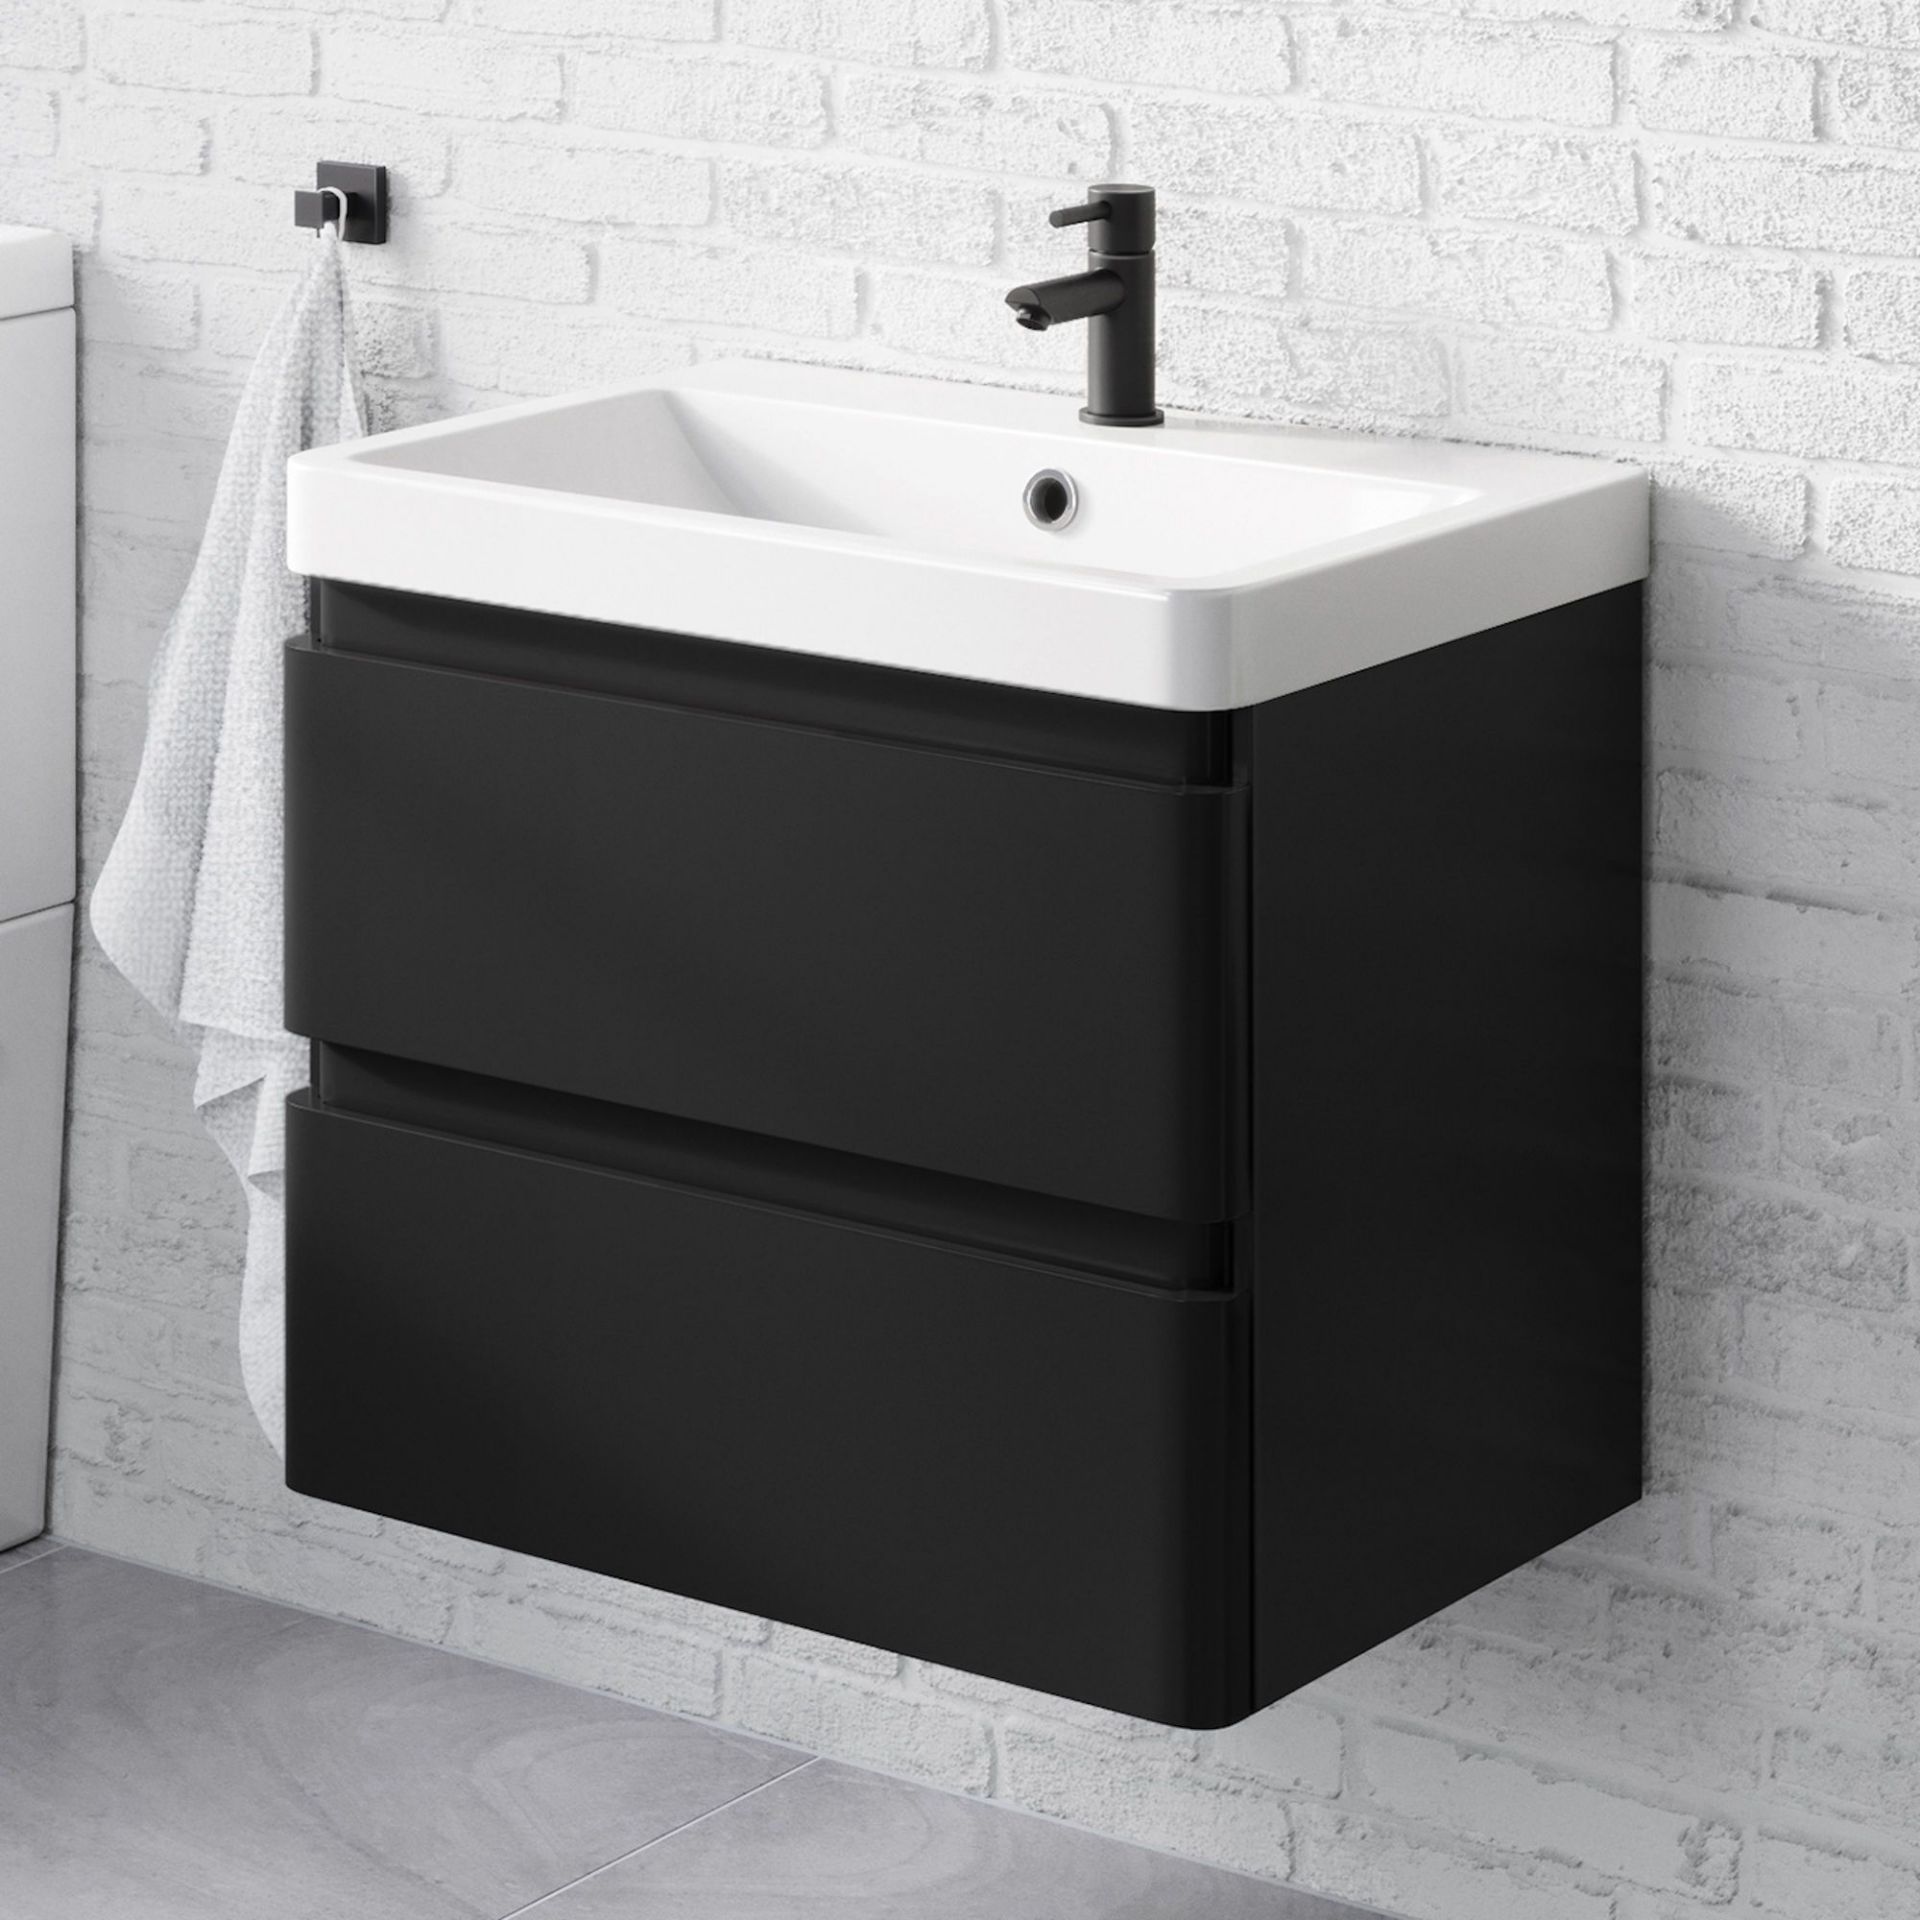 New & Boxed 600 mm Denver II Black Built In Basin Drawer Unit - Wall Hung. RRP £849.99. Mf246...